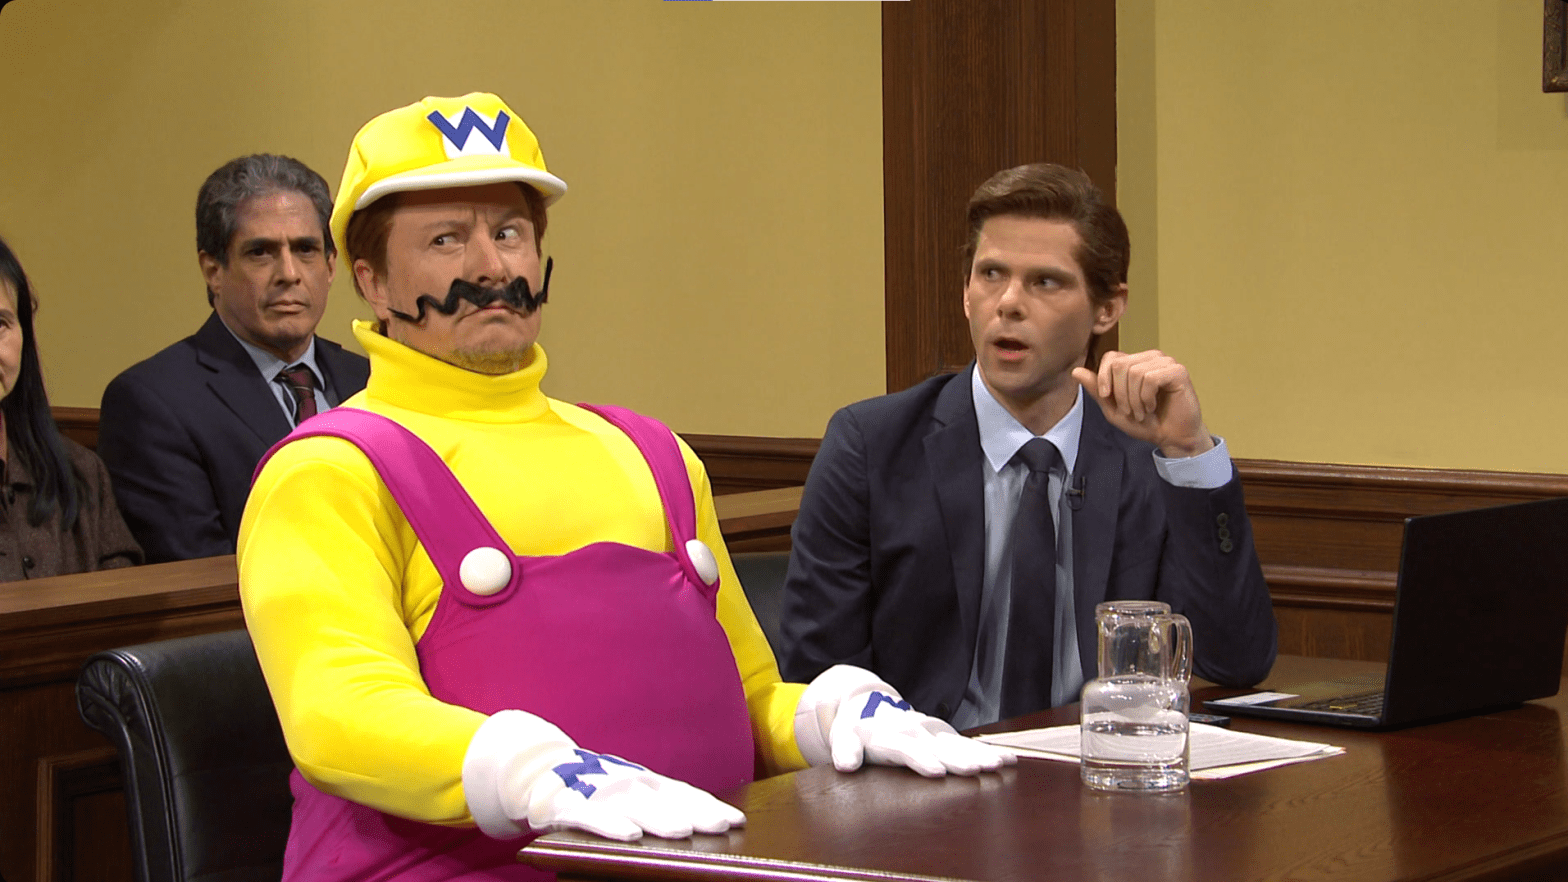 One of the more bizarre sketches from last night's episode of SNL. Tesla CEO Elon Musk, seen here playing Wario, stands trial after being accused of Mario's murder in a banana peel and go-kart related incident.  (Screenshot: Peacock/Gizmodo)